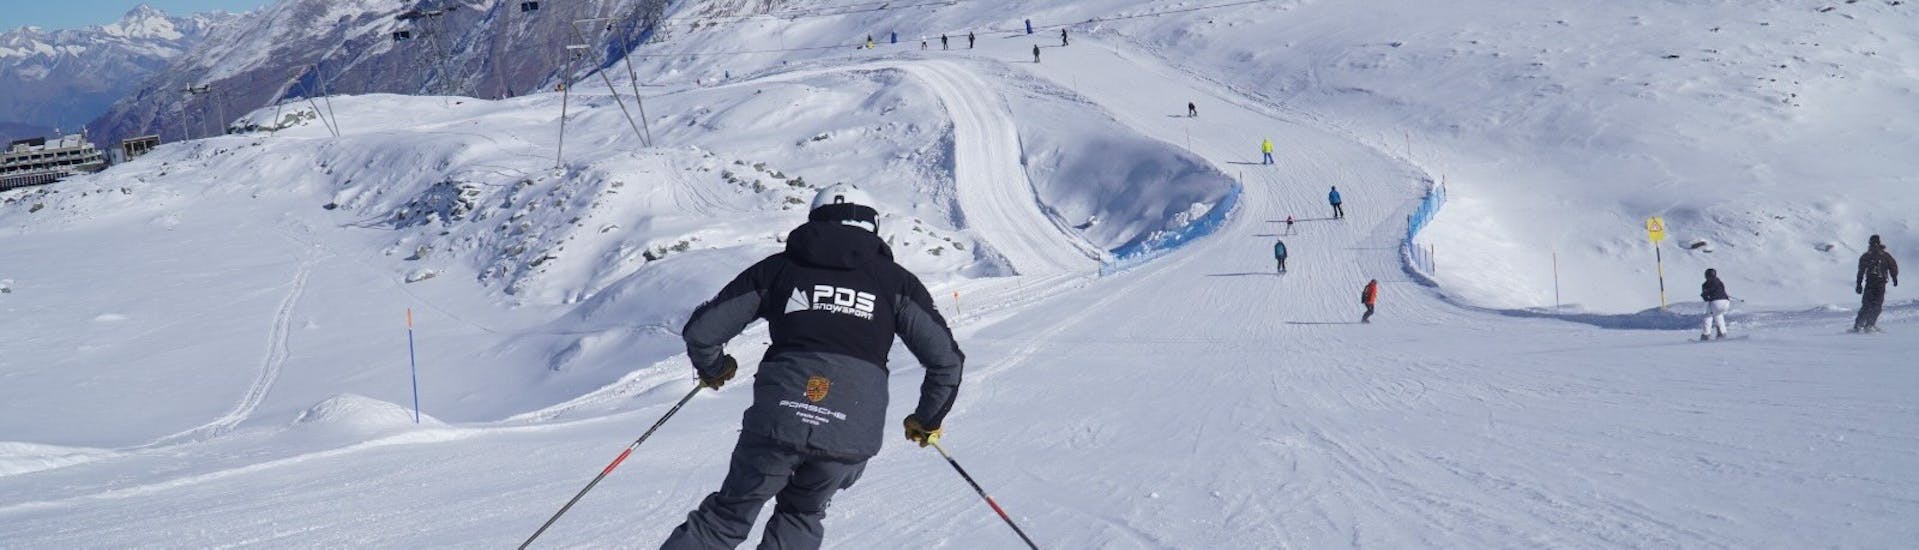 A skier races downhill during his private adult ski lessons with PDS Snowsports ski school.